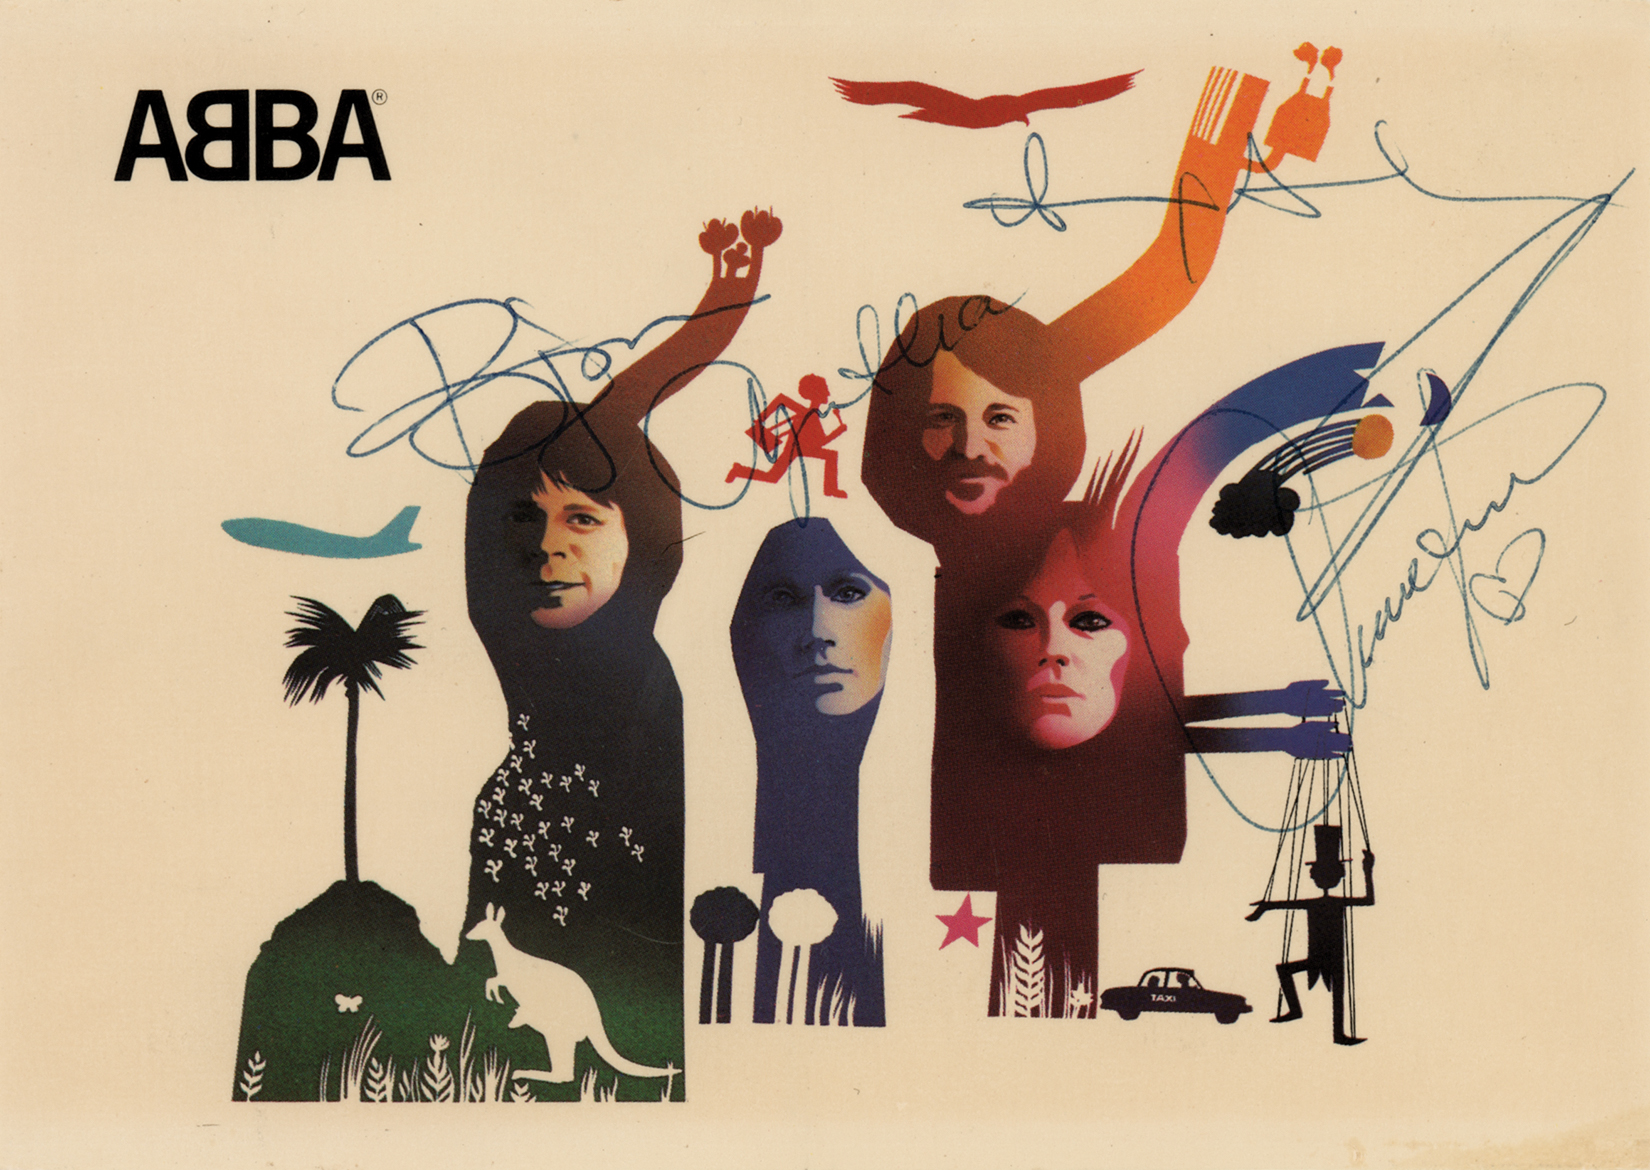 Lot #660 ABBA Signed Photograph